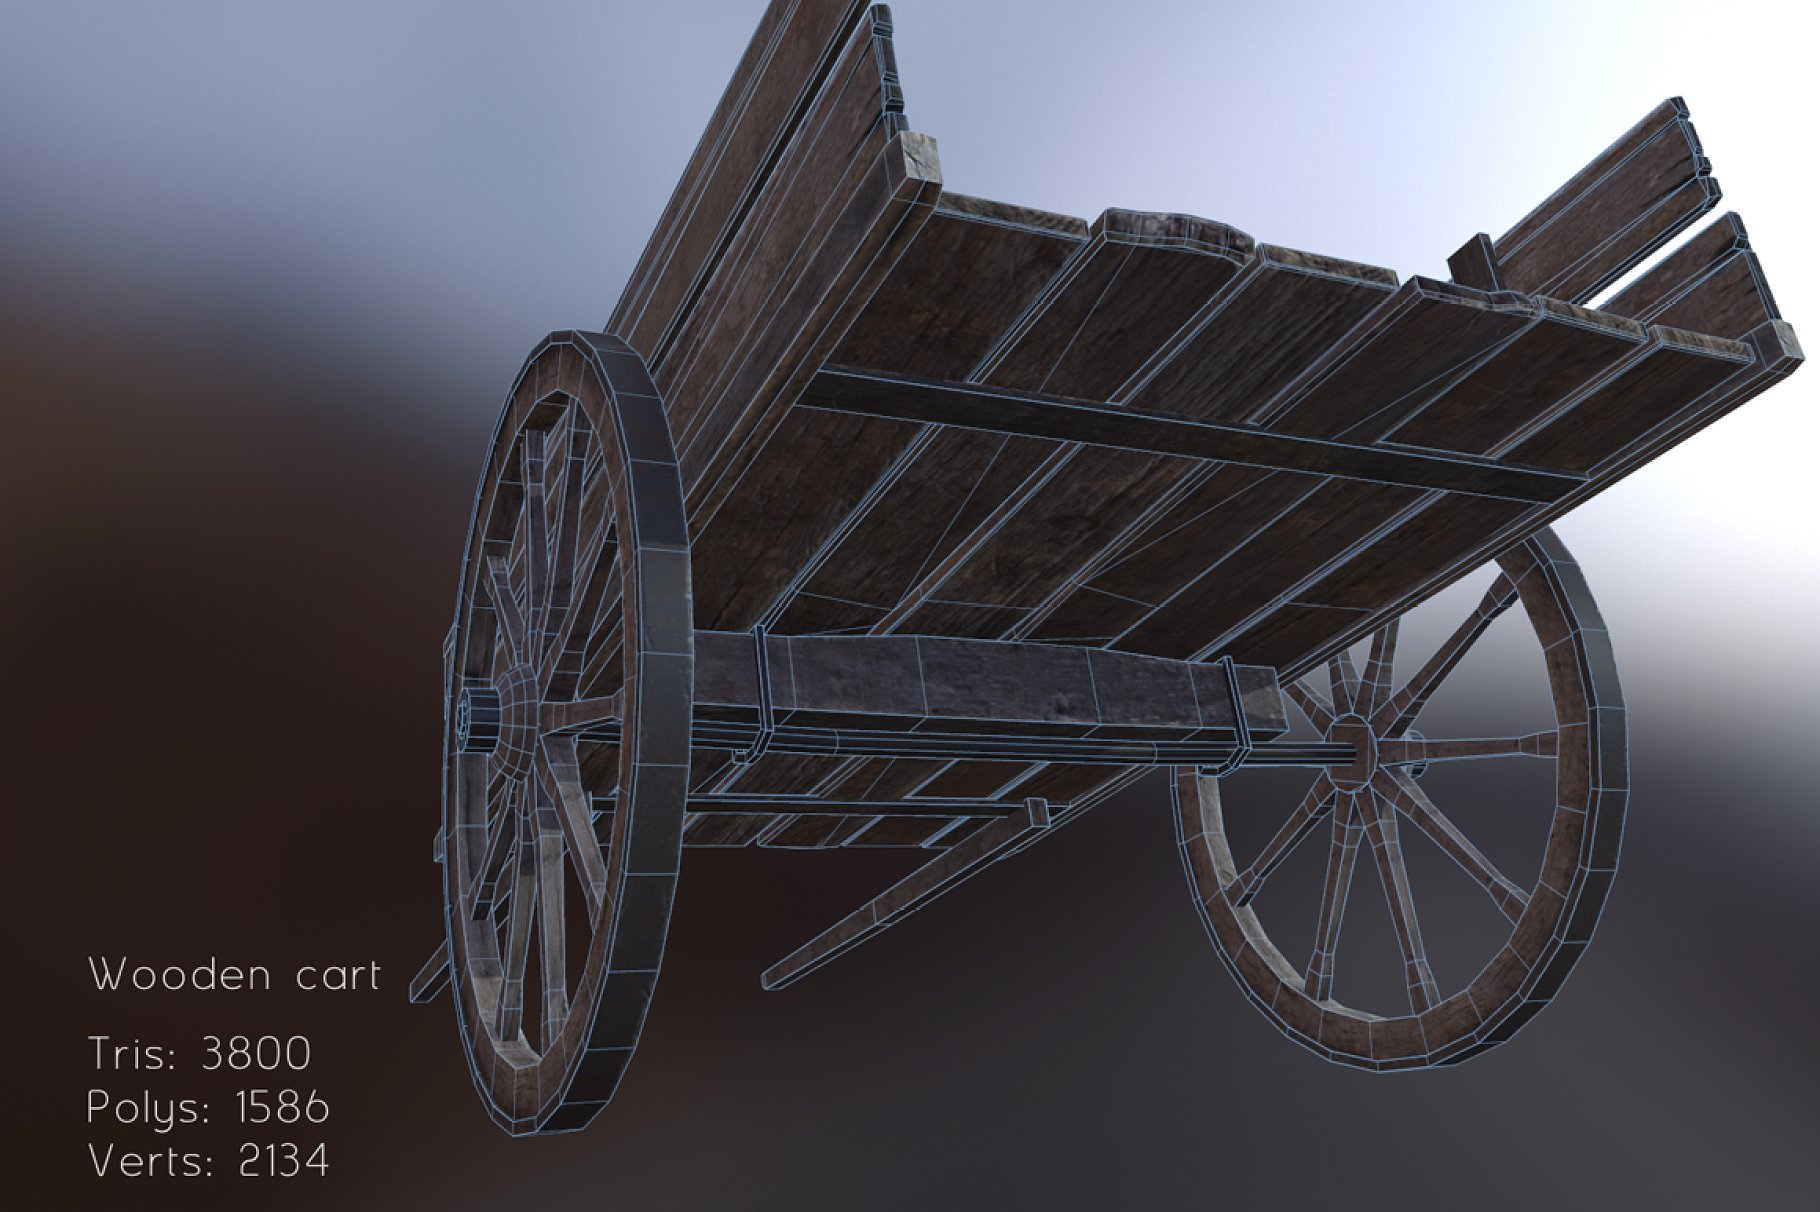 Graphic mockup of wooden cart on a blue and gray background.